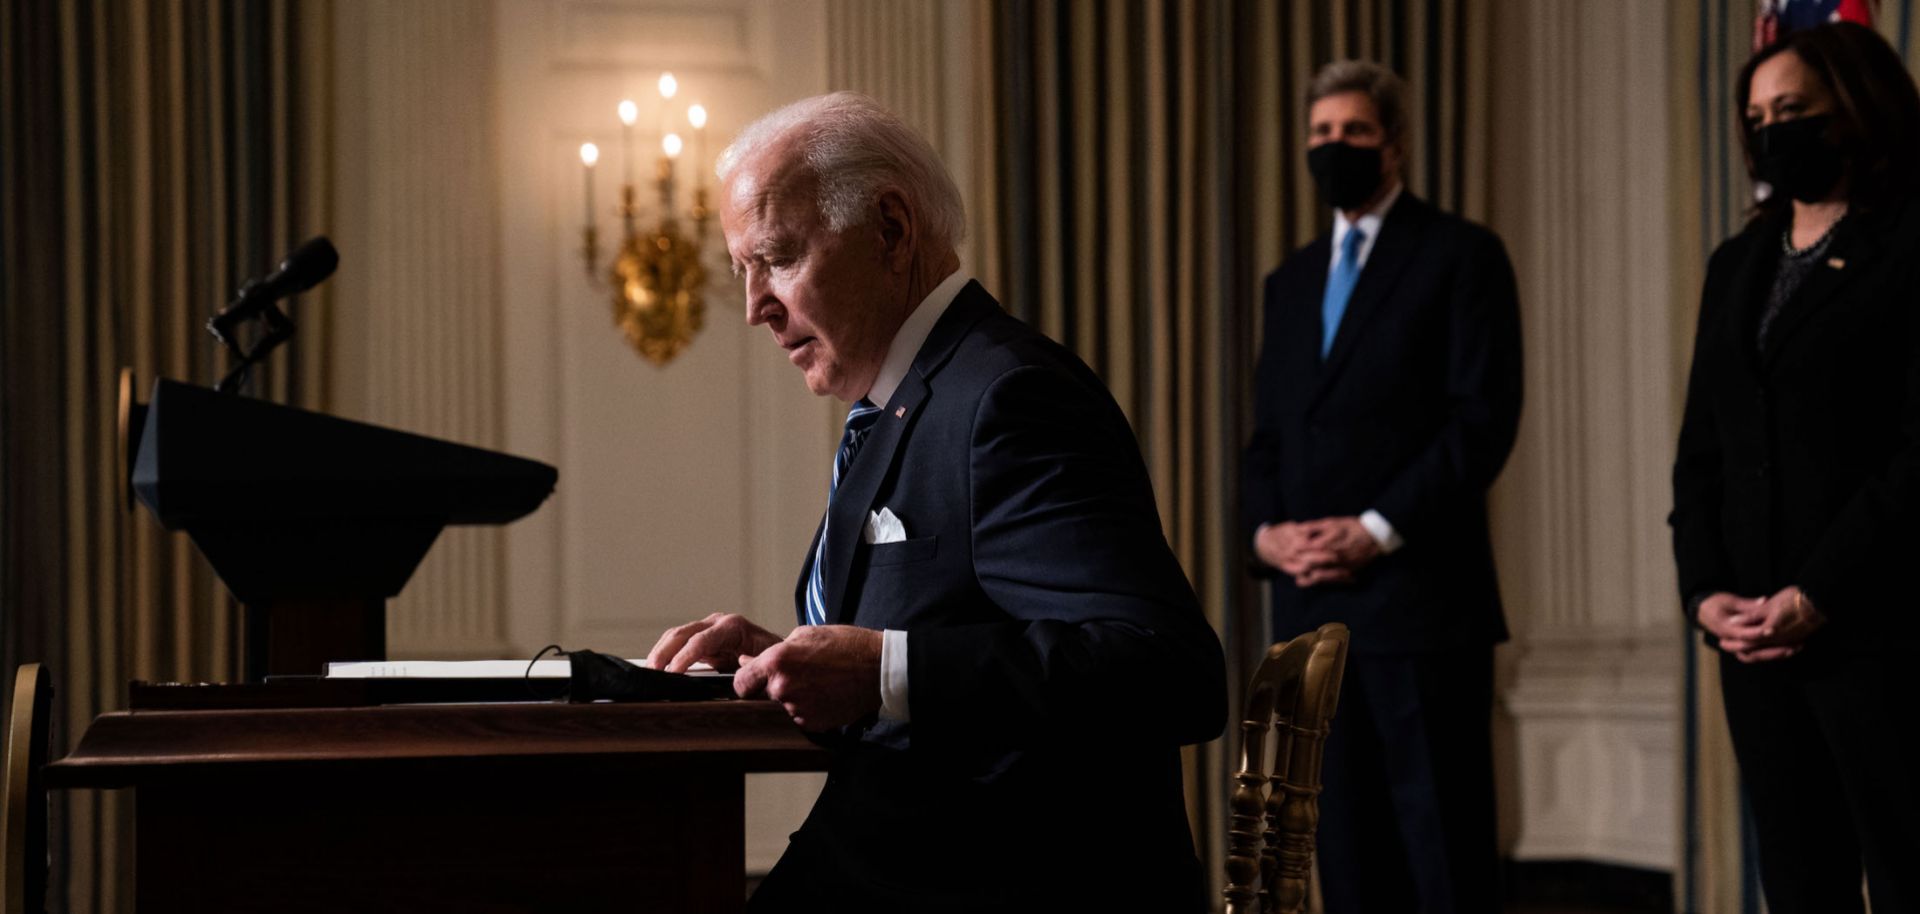 U.S. President Joe Biden prepares to sign executive orders after speaking about climate change issues in the State Dining Room of the White House on Jan. 27, 2021 in Washington D.C.  Behind him stands Special Presidential Envoy for Climate John Kerry (left) and Vice President Kamala Harris (right).